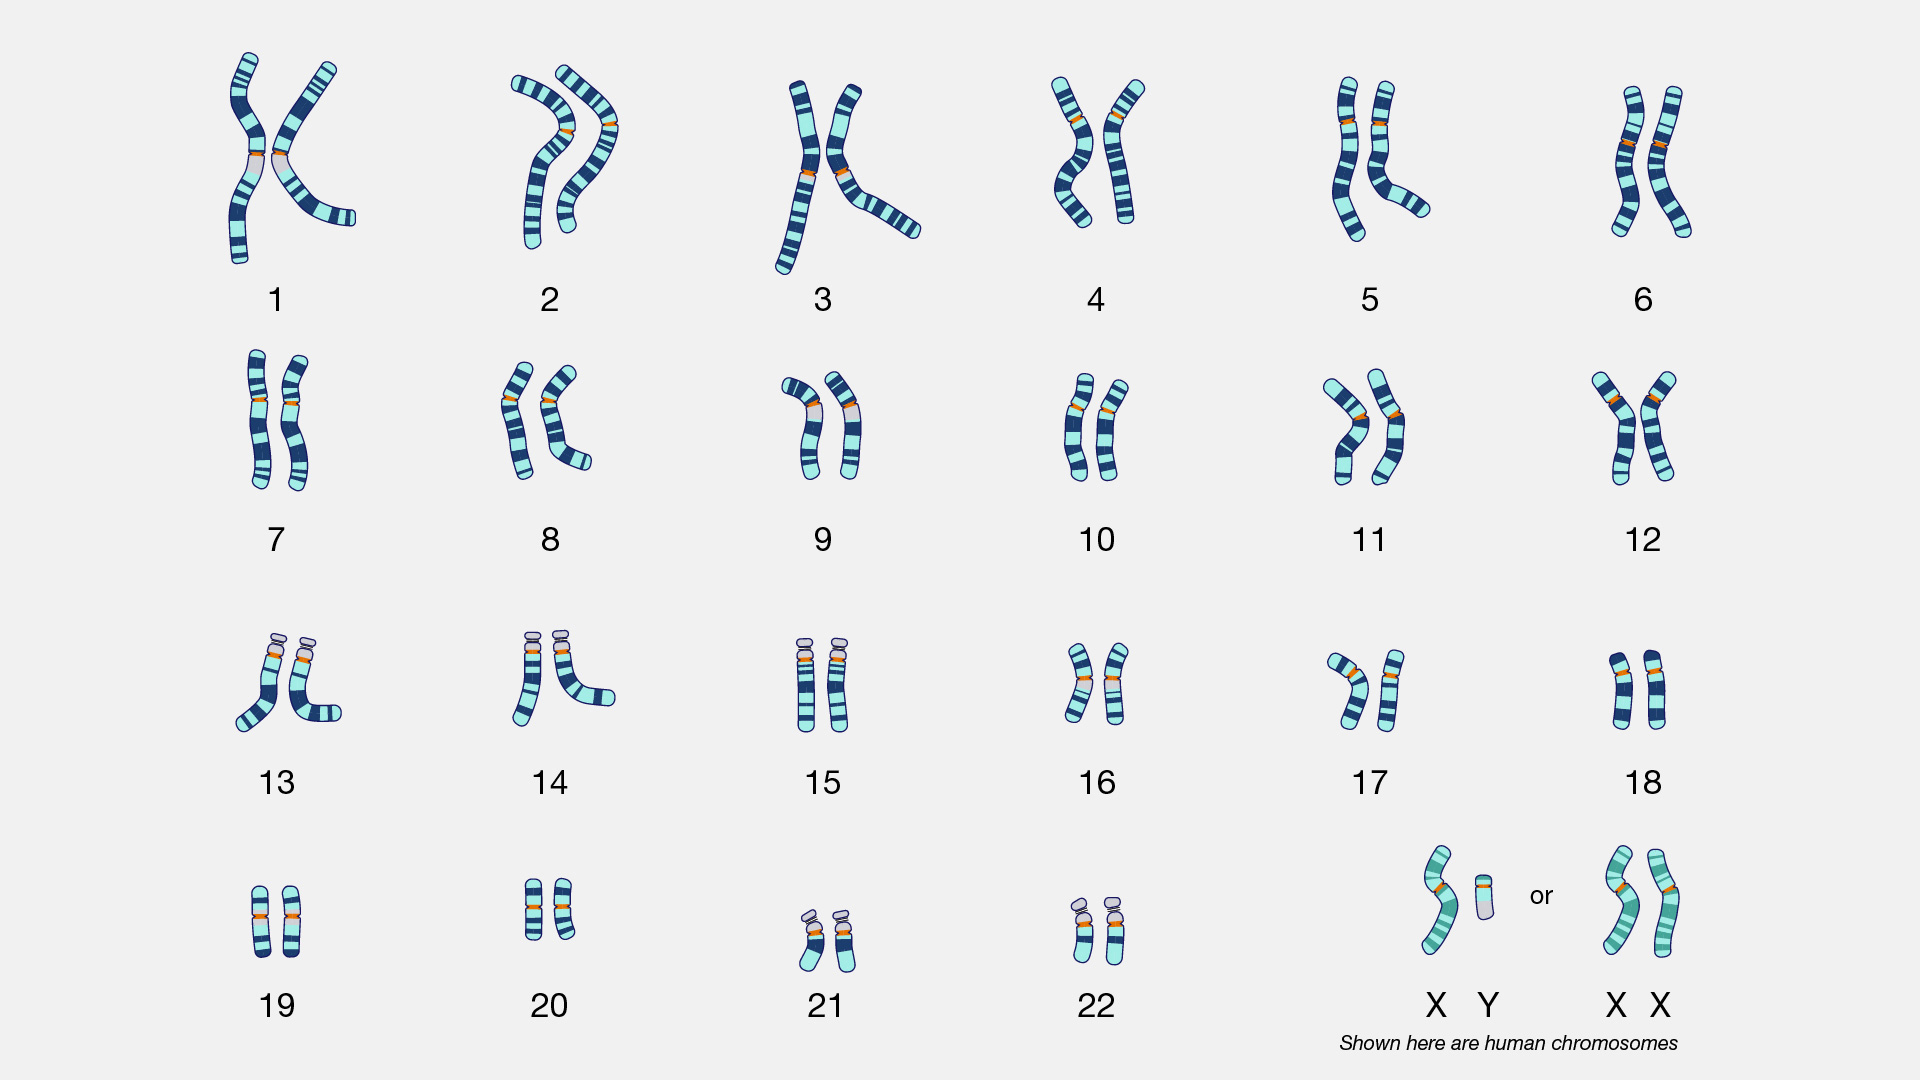 Karyotype showing pairs of chromosomes organized by size into 23 pairs.